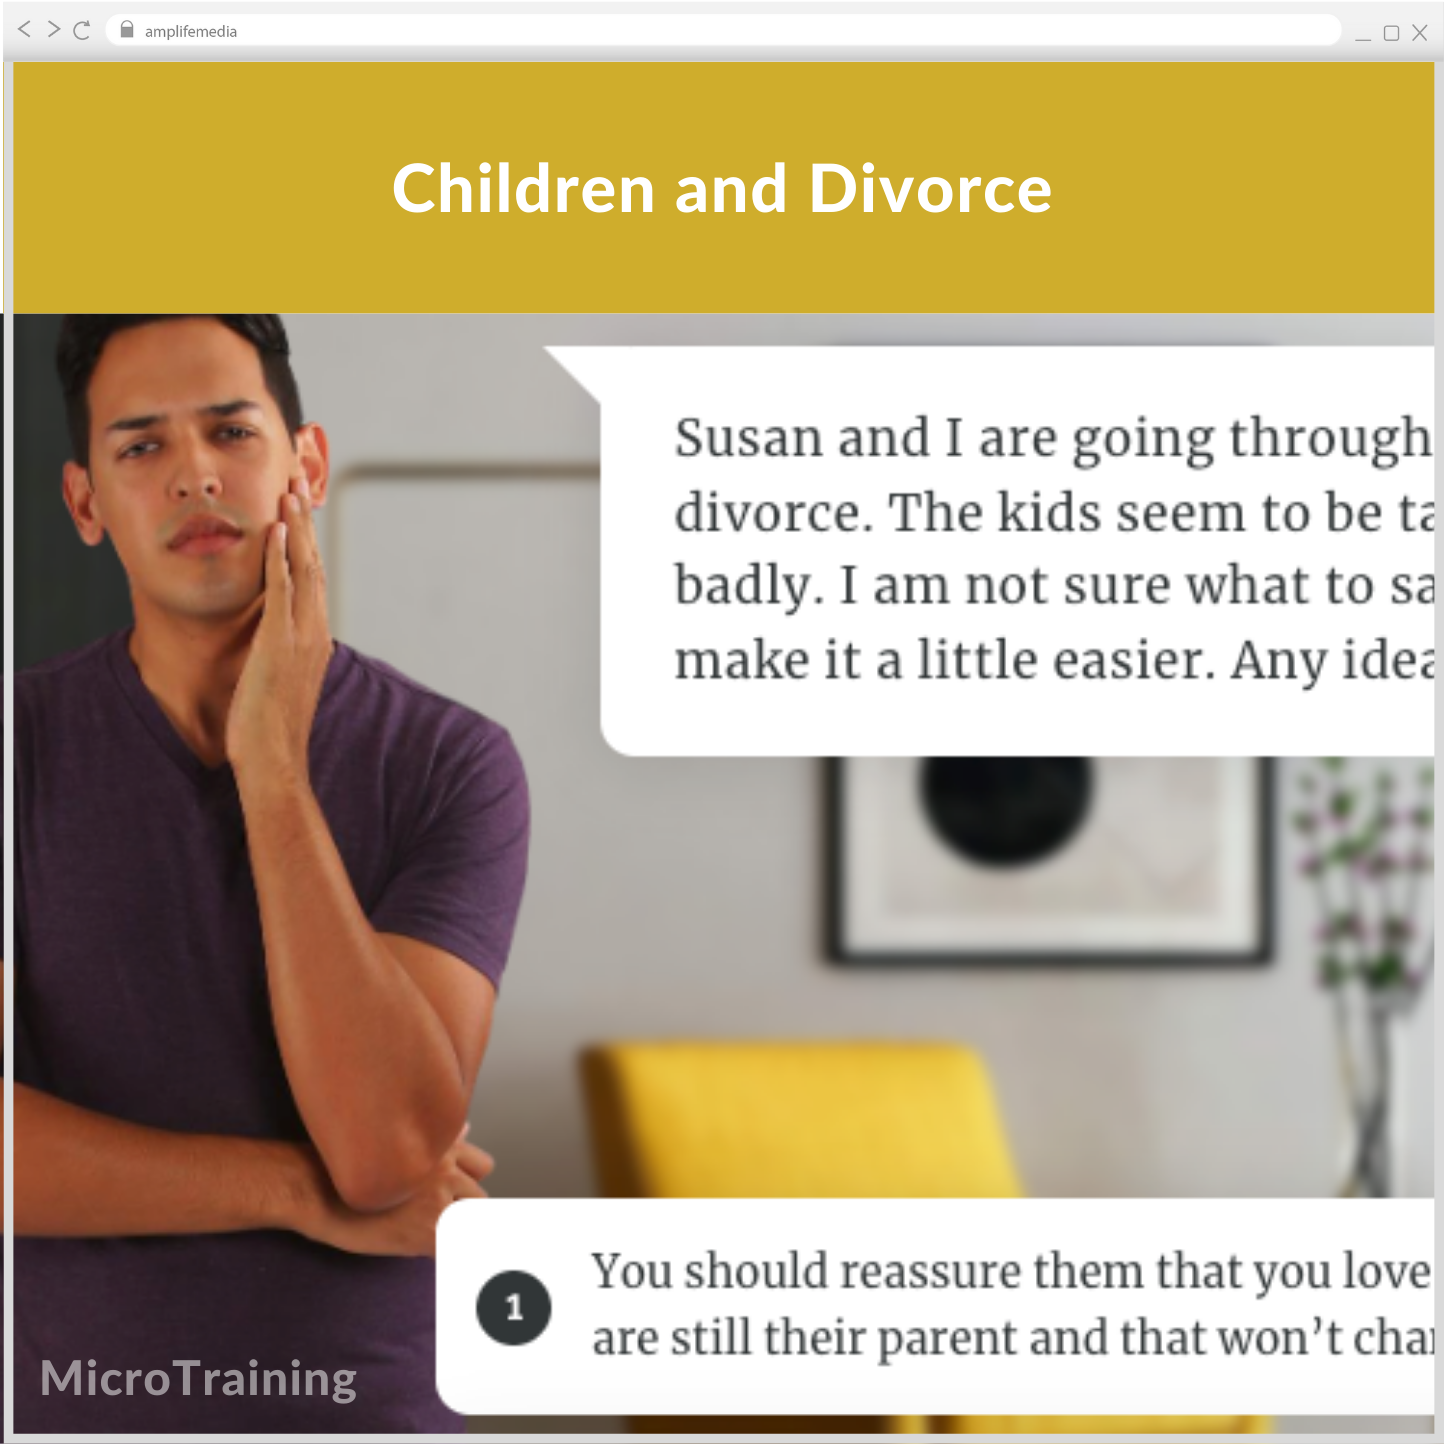 Subscription to Wellbeing Media: Children and Divorce MT 721